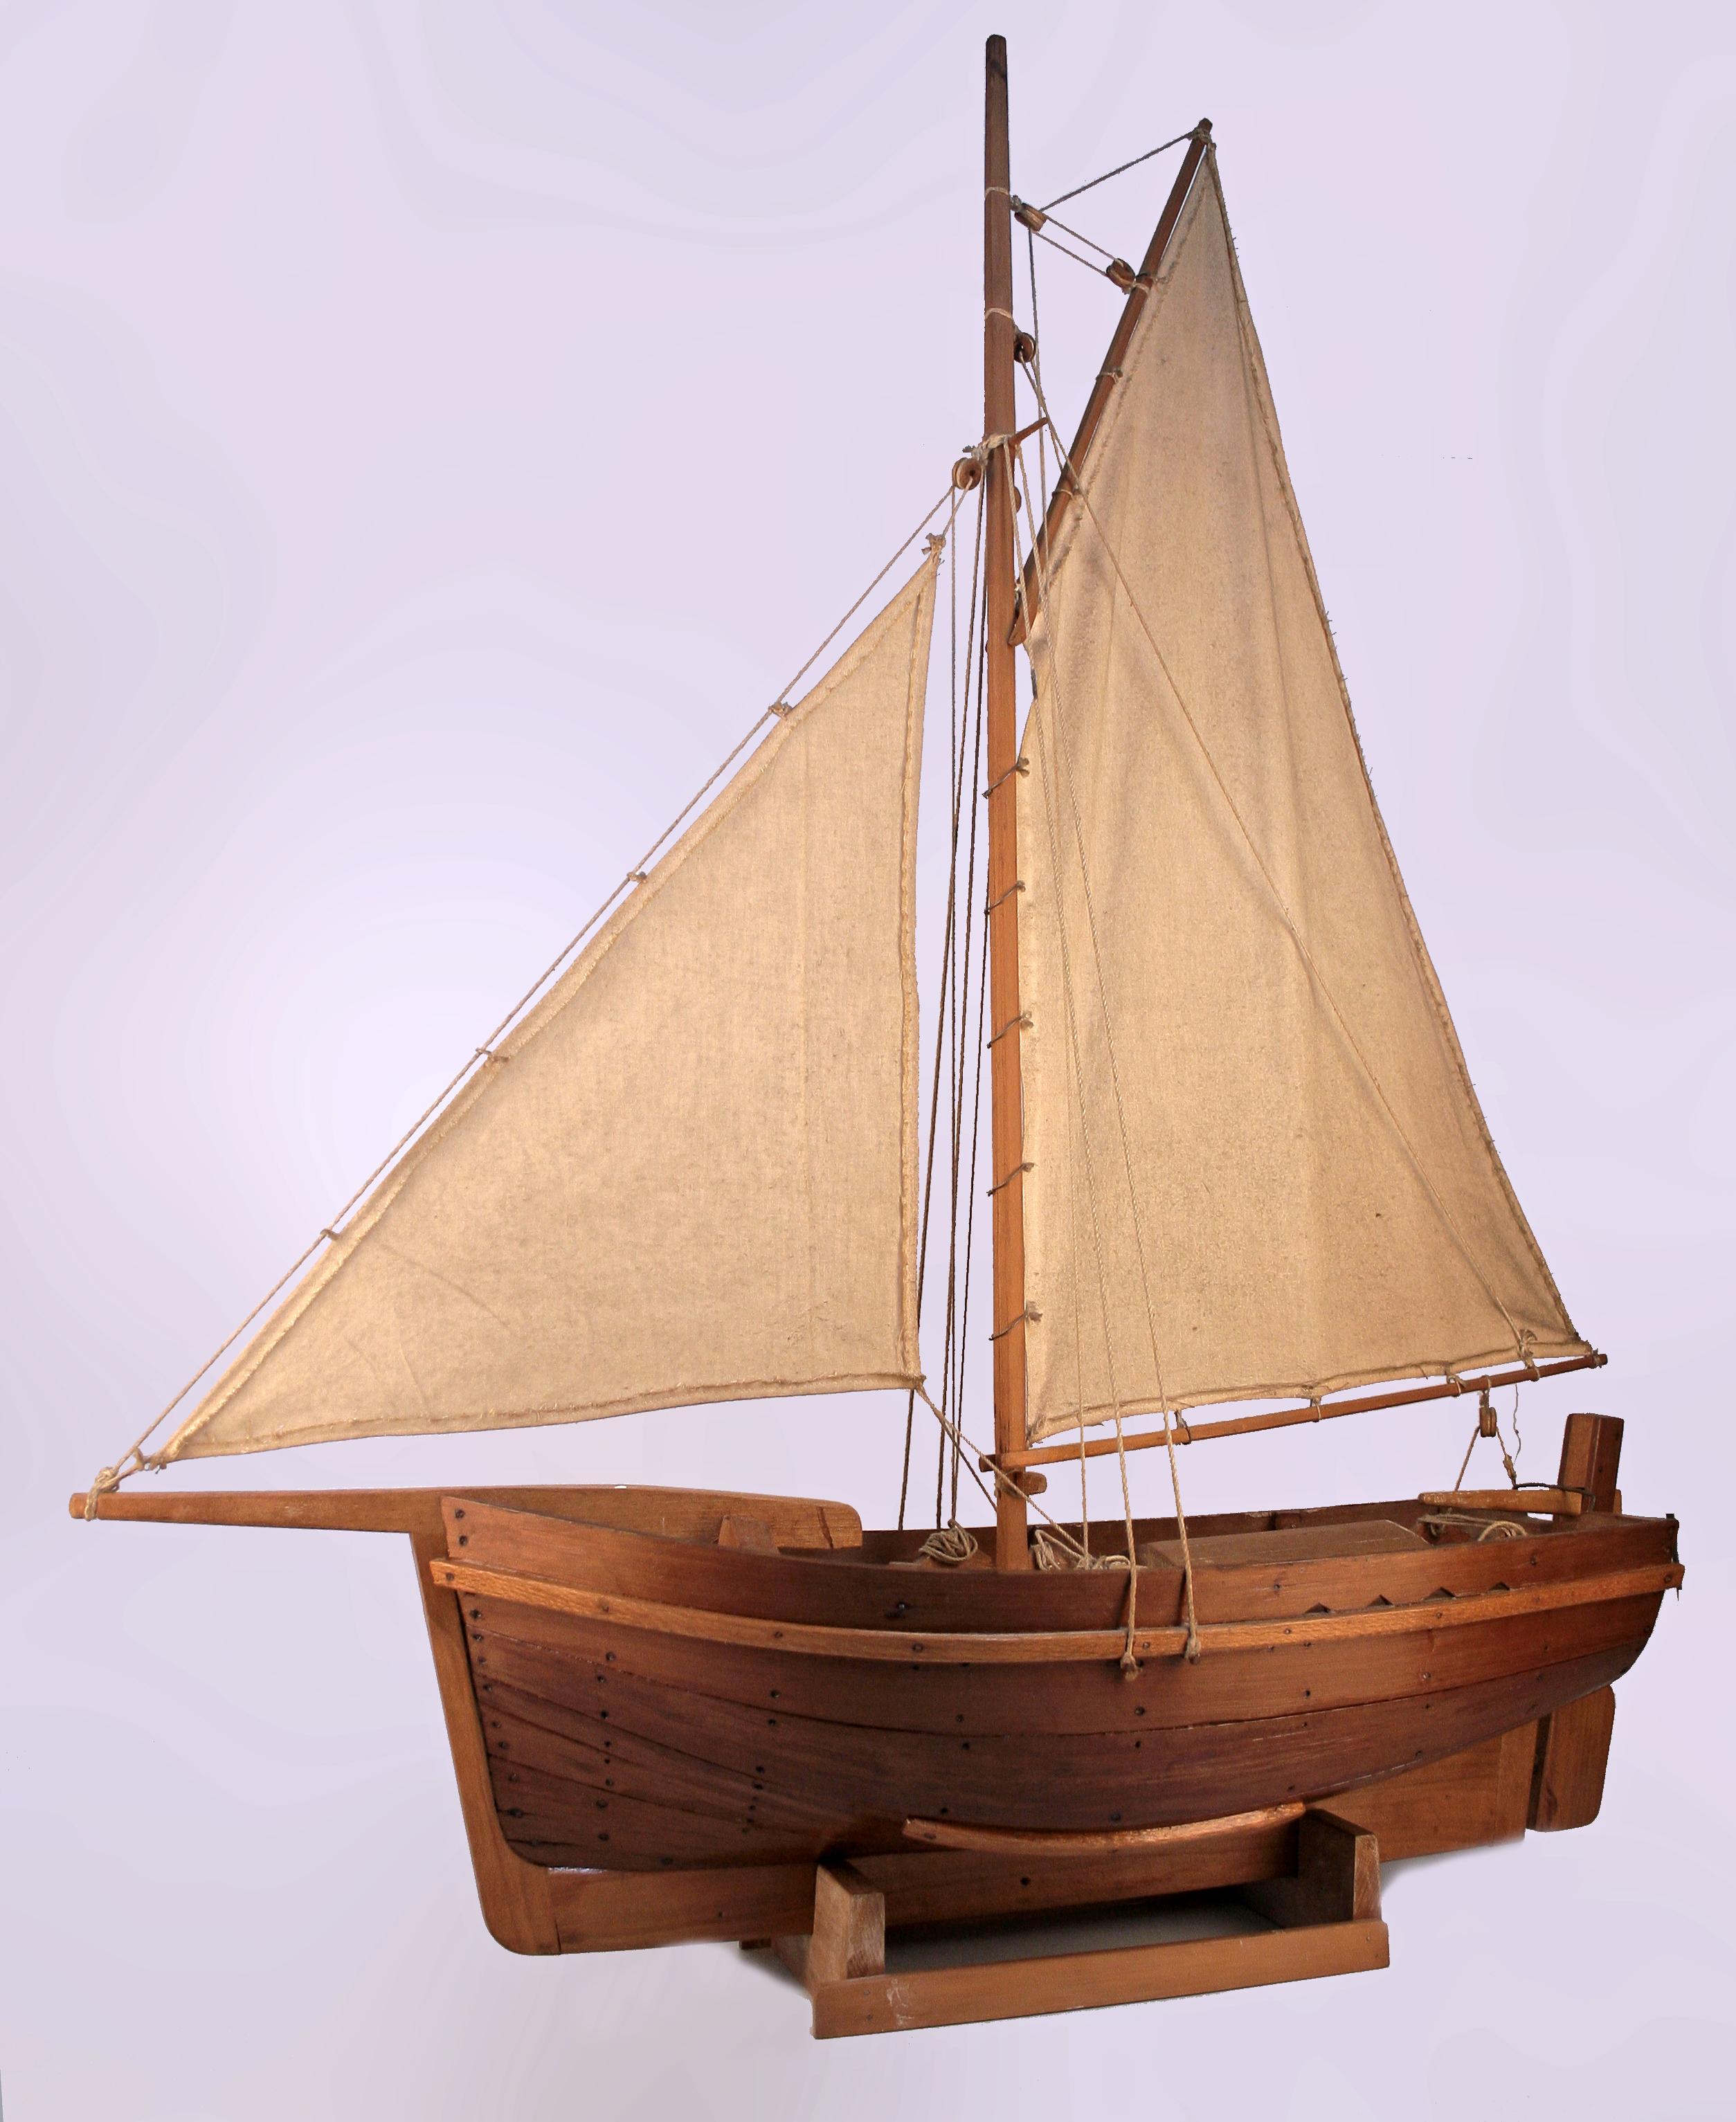 Mid-20th century wood model of antique fishing boat ship with sails made in Argentina

By: unknown
Material: wood, thread, fabric
Technique: carved, hand-carved, hand-crafted, varnished
Dimensions: 34 in x 12 in x 42 in
Date: mid-20th century
Style: